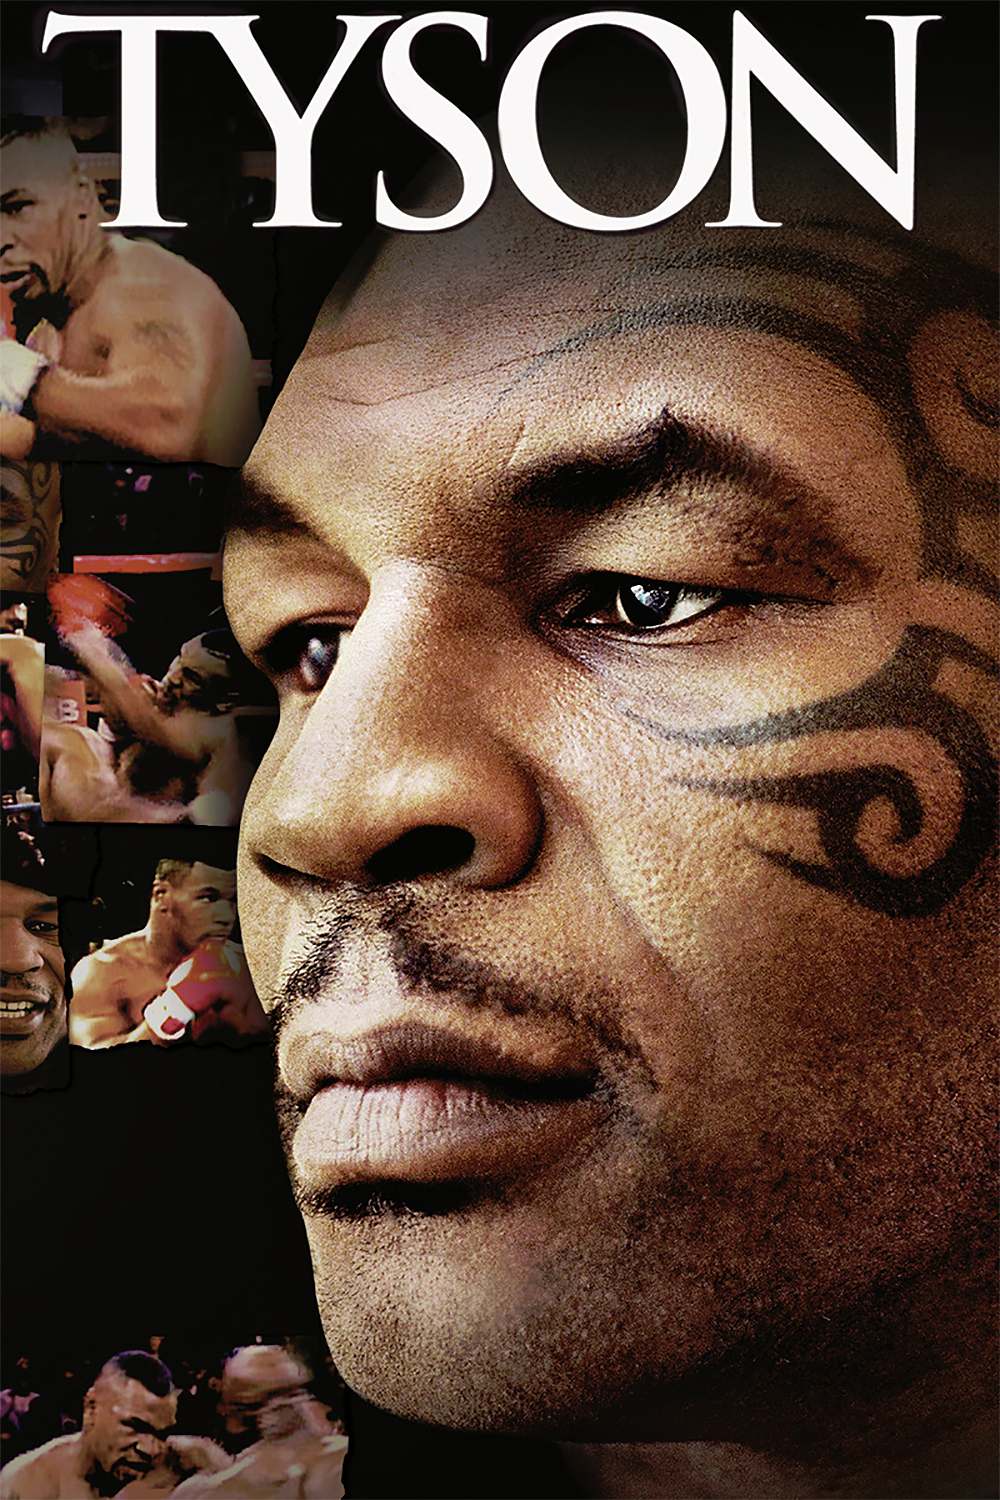 Poster for the movie "Tyson"